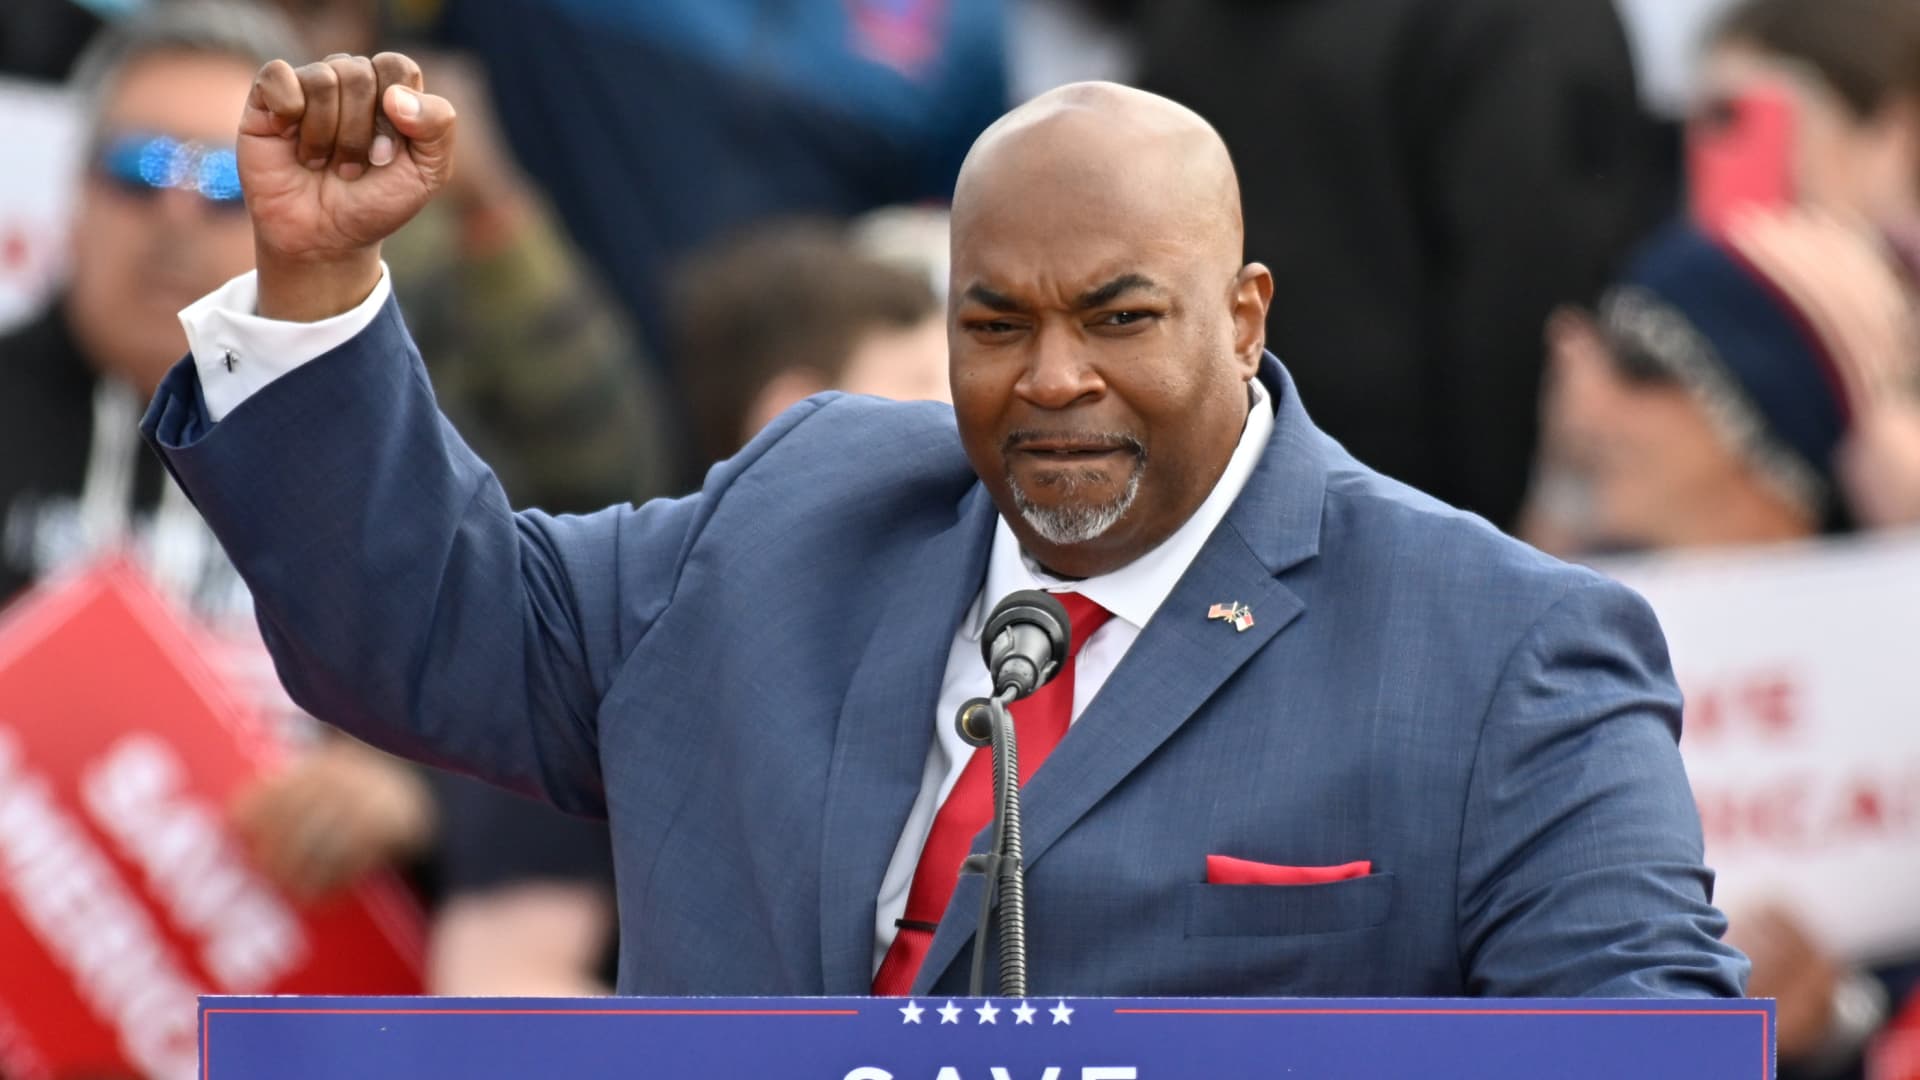 Mark Robinson speaks during former US President Donald Trump's rally sponsored by Save America with Ted Budd, Madison Cawthorn, Bo Hines, Dan Bishop, Mark Robinson and Greg Murphy in Selma, NC, on April 9, 2022.